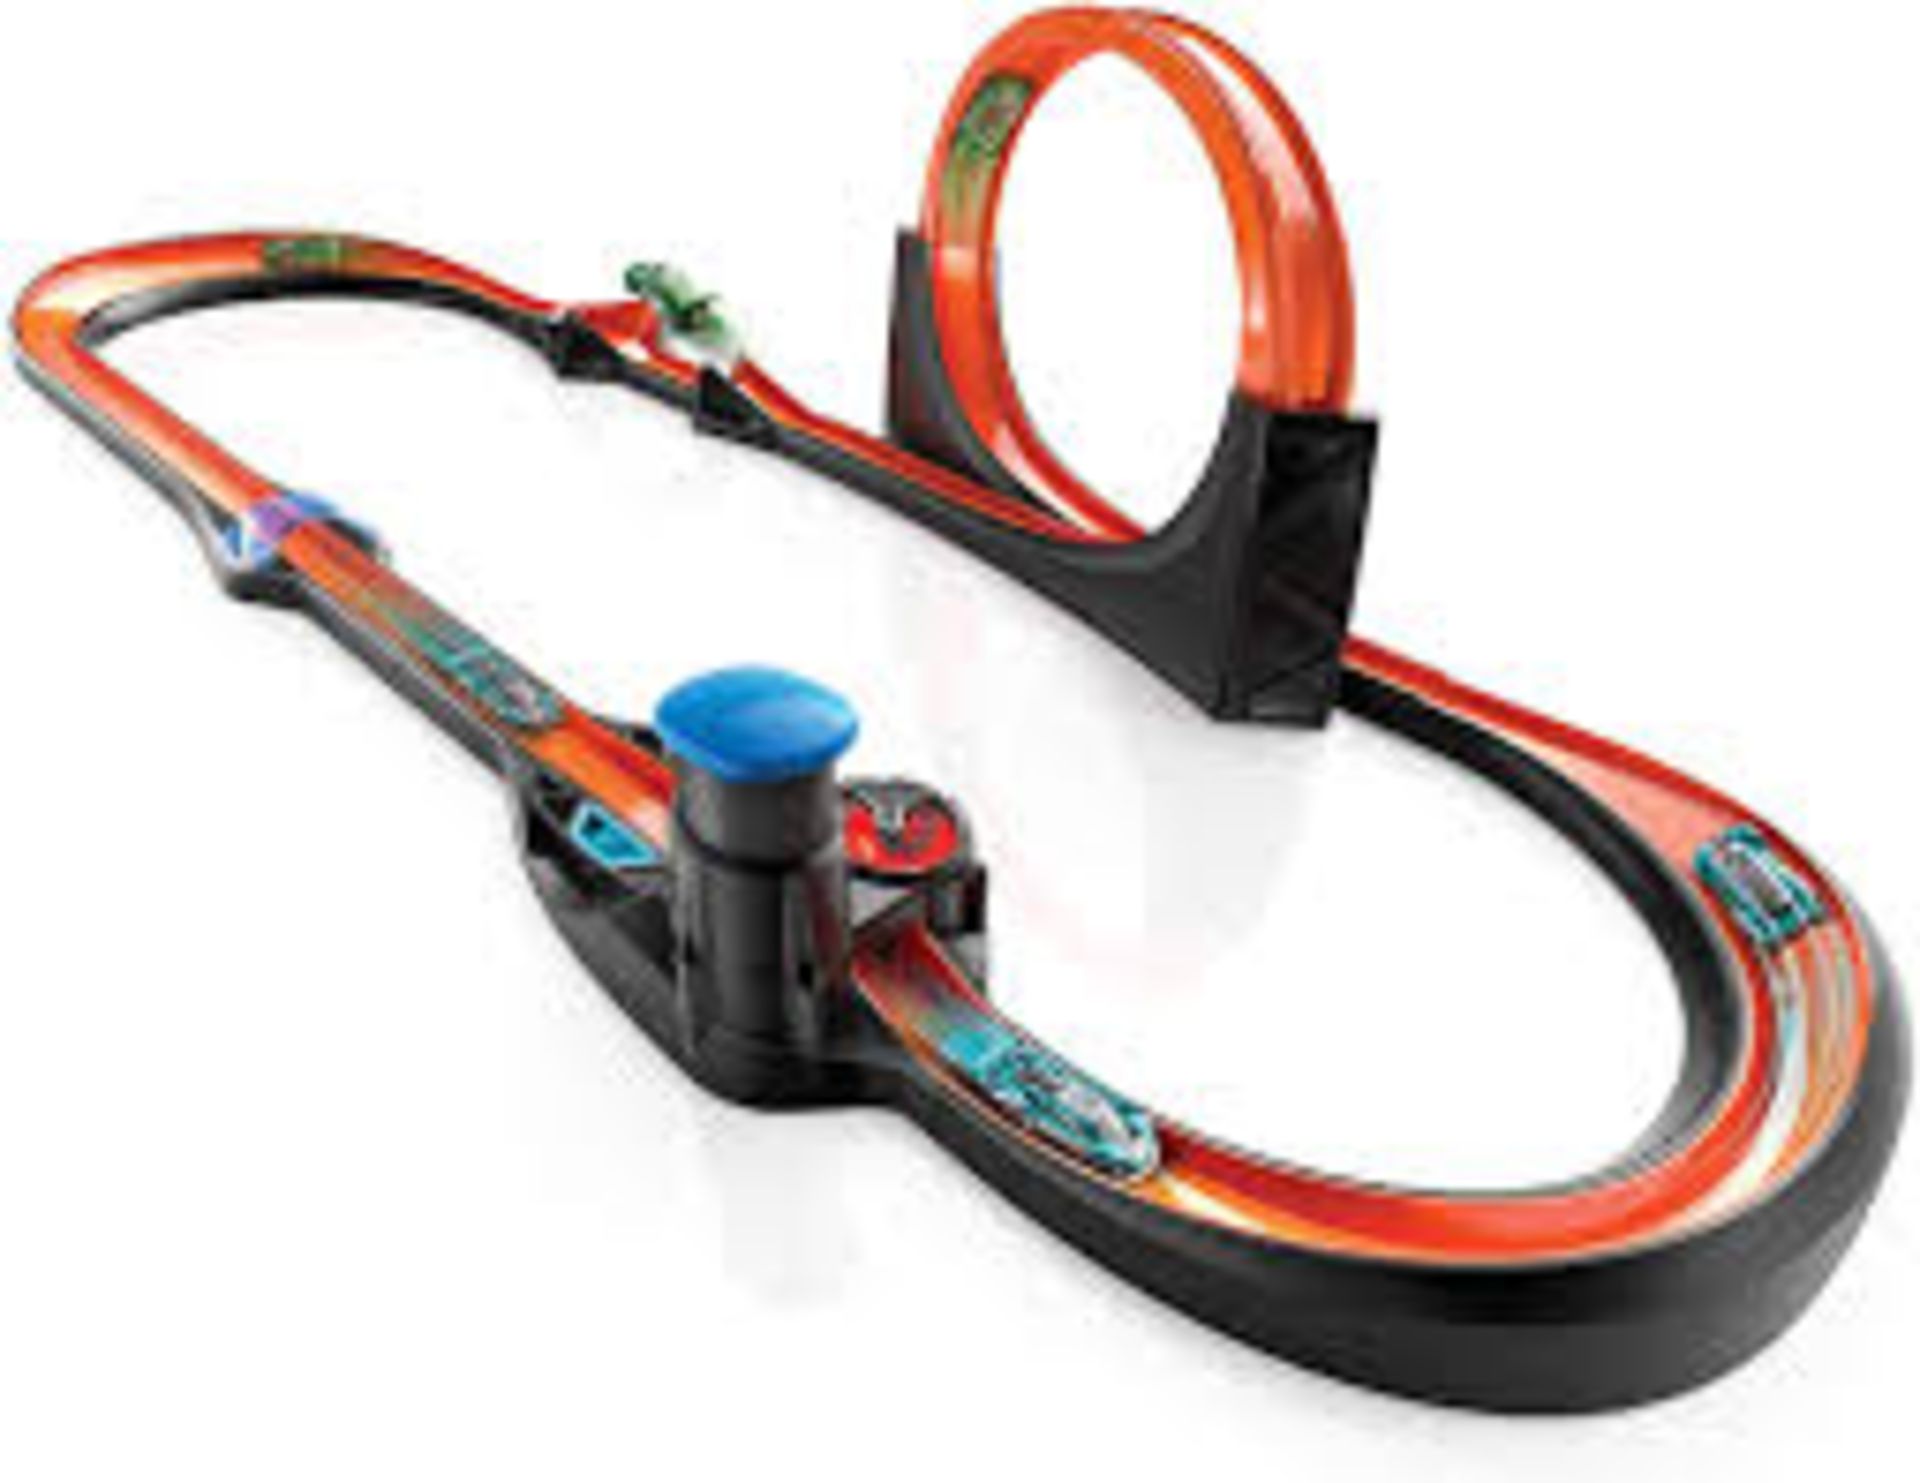 Boxed Hot Wheels Uniqually Identifiable Smart Track Interactive Racing Kit RRP £190 (Public